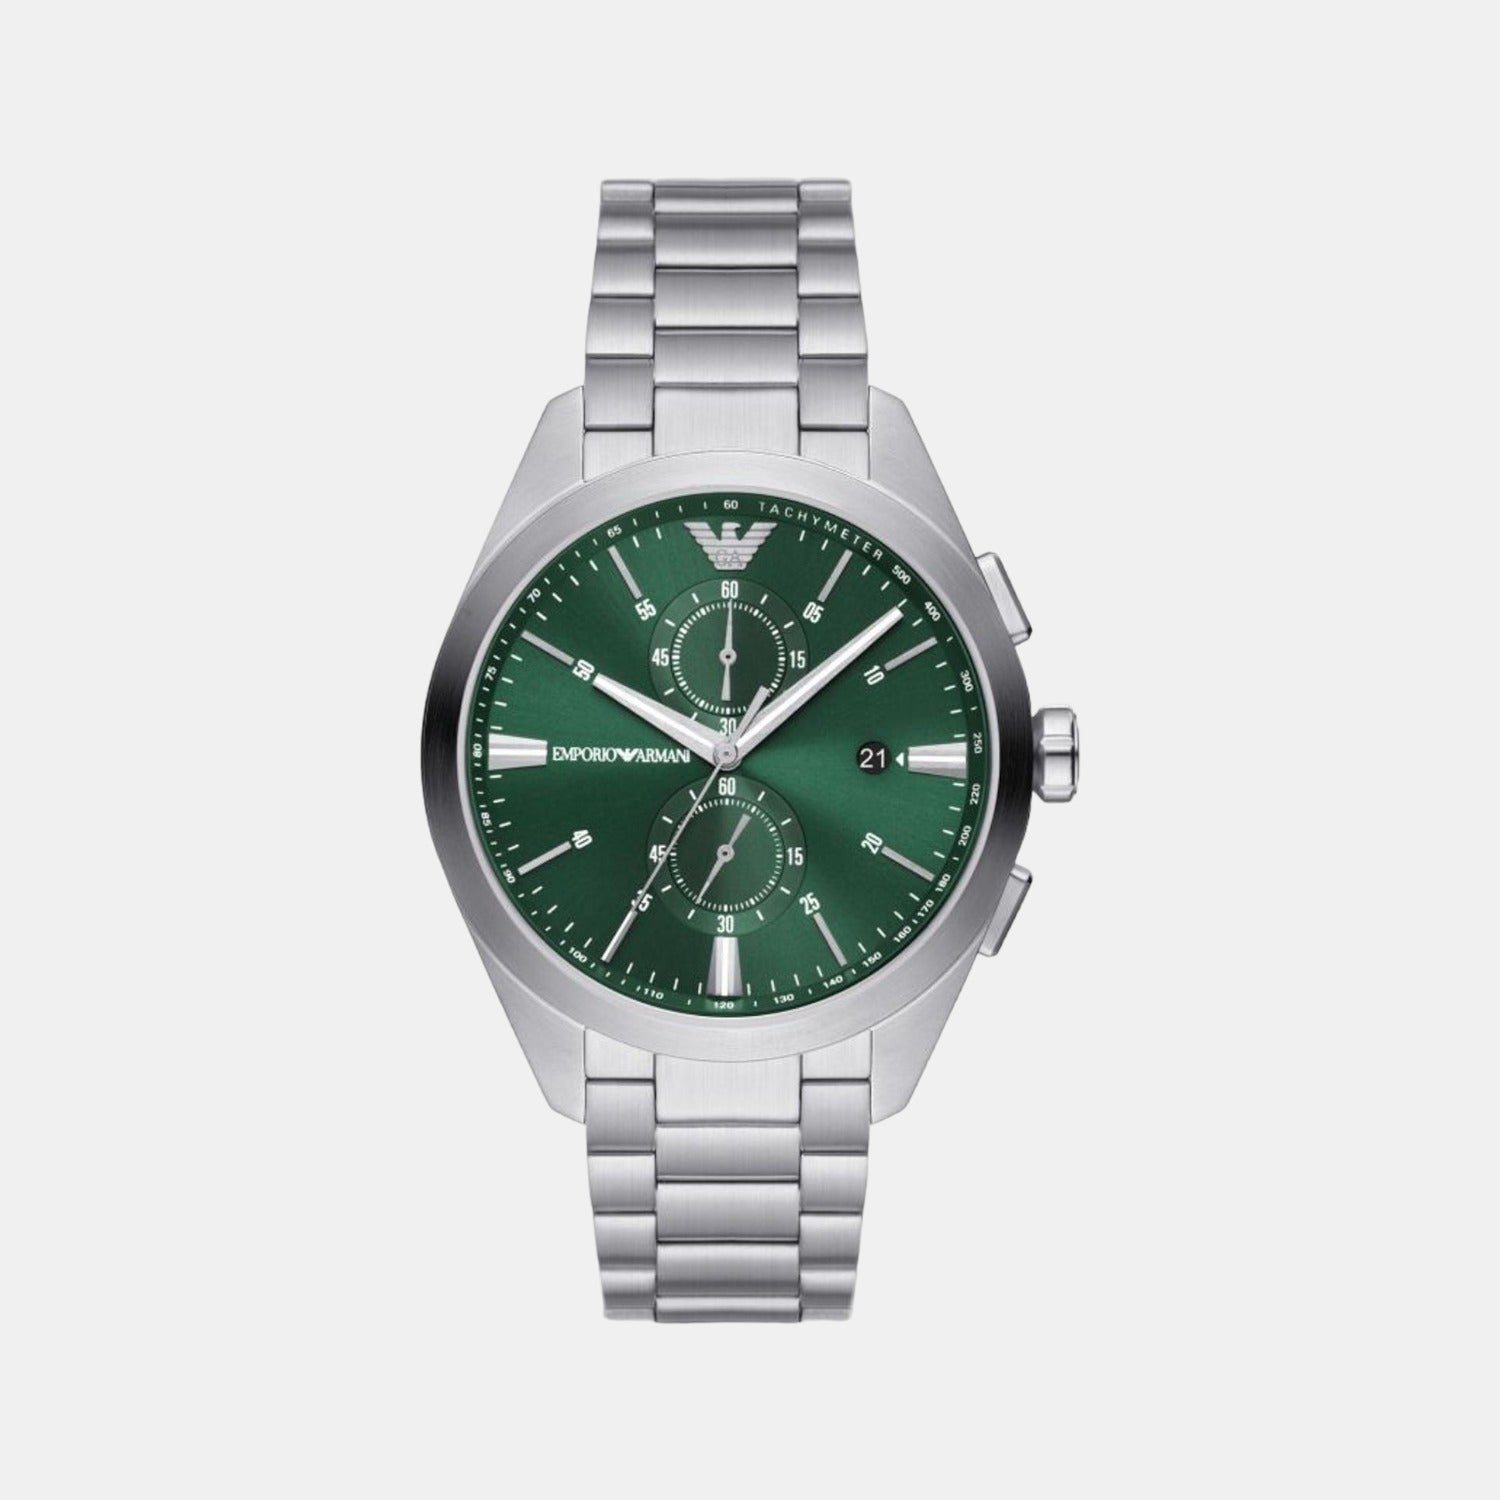 Male Green Stainless Steel Chronograph Watch AR11480